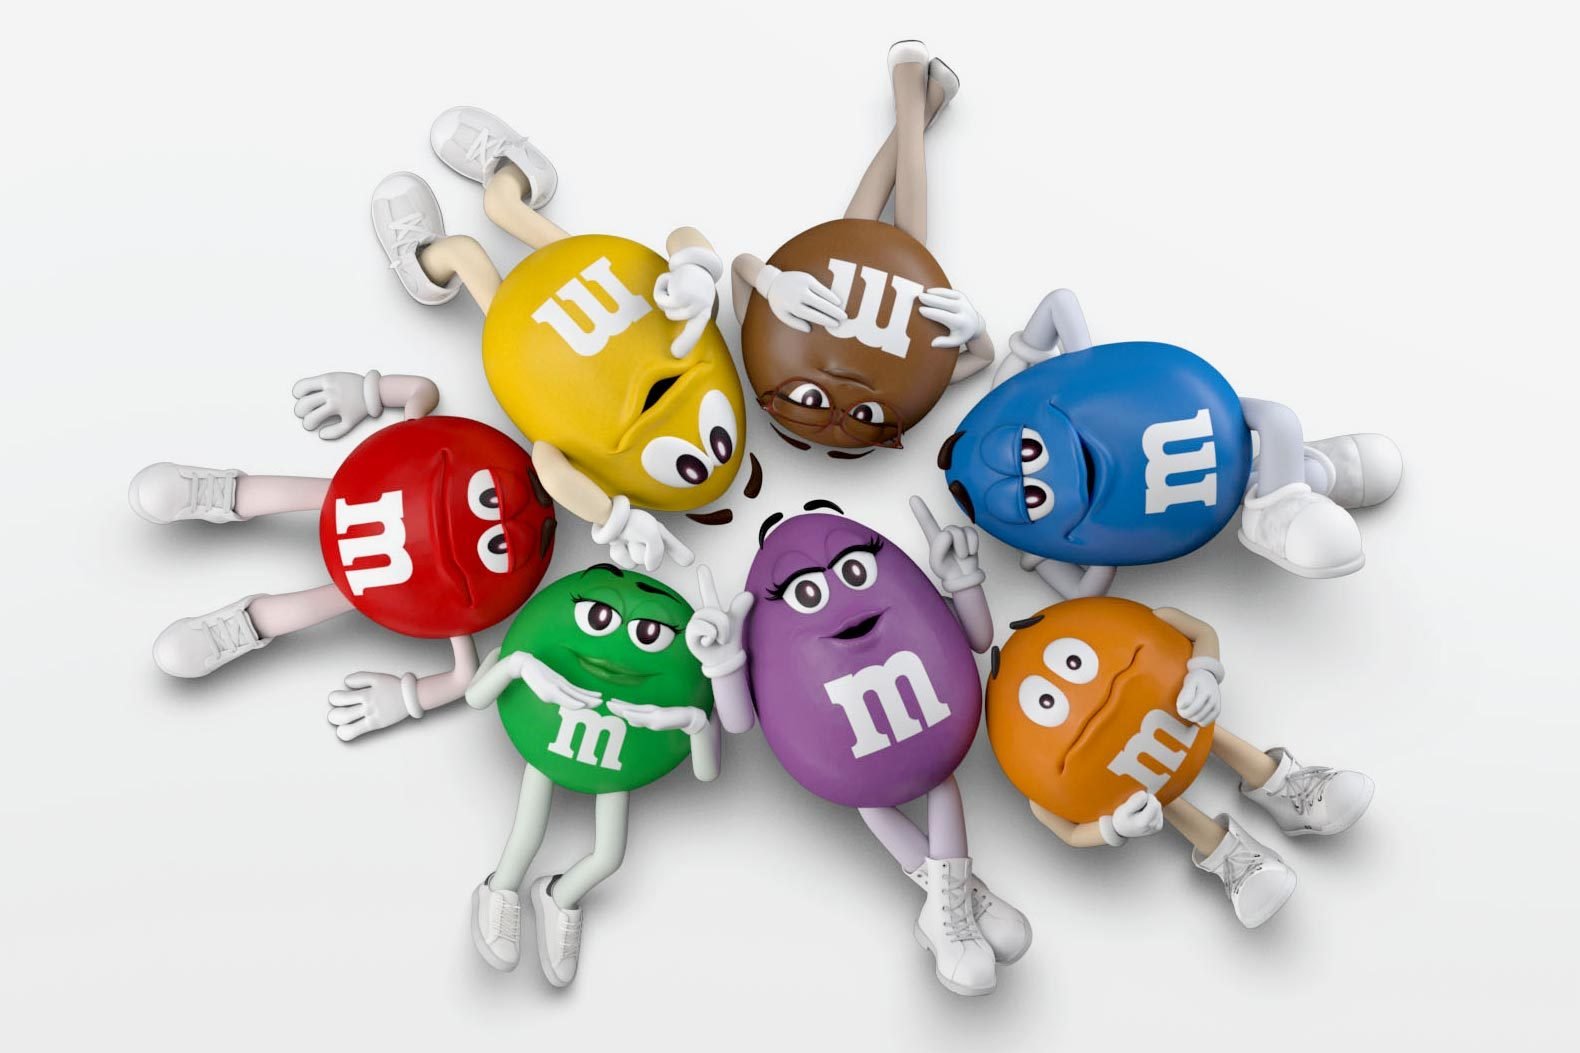 Quiz: Is This M&M Flavor Real Or Fake? - Limited-Edition M&M